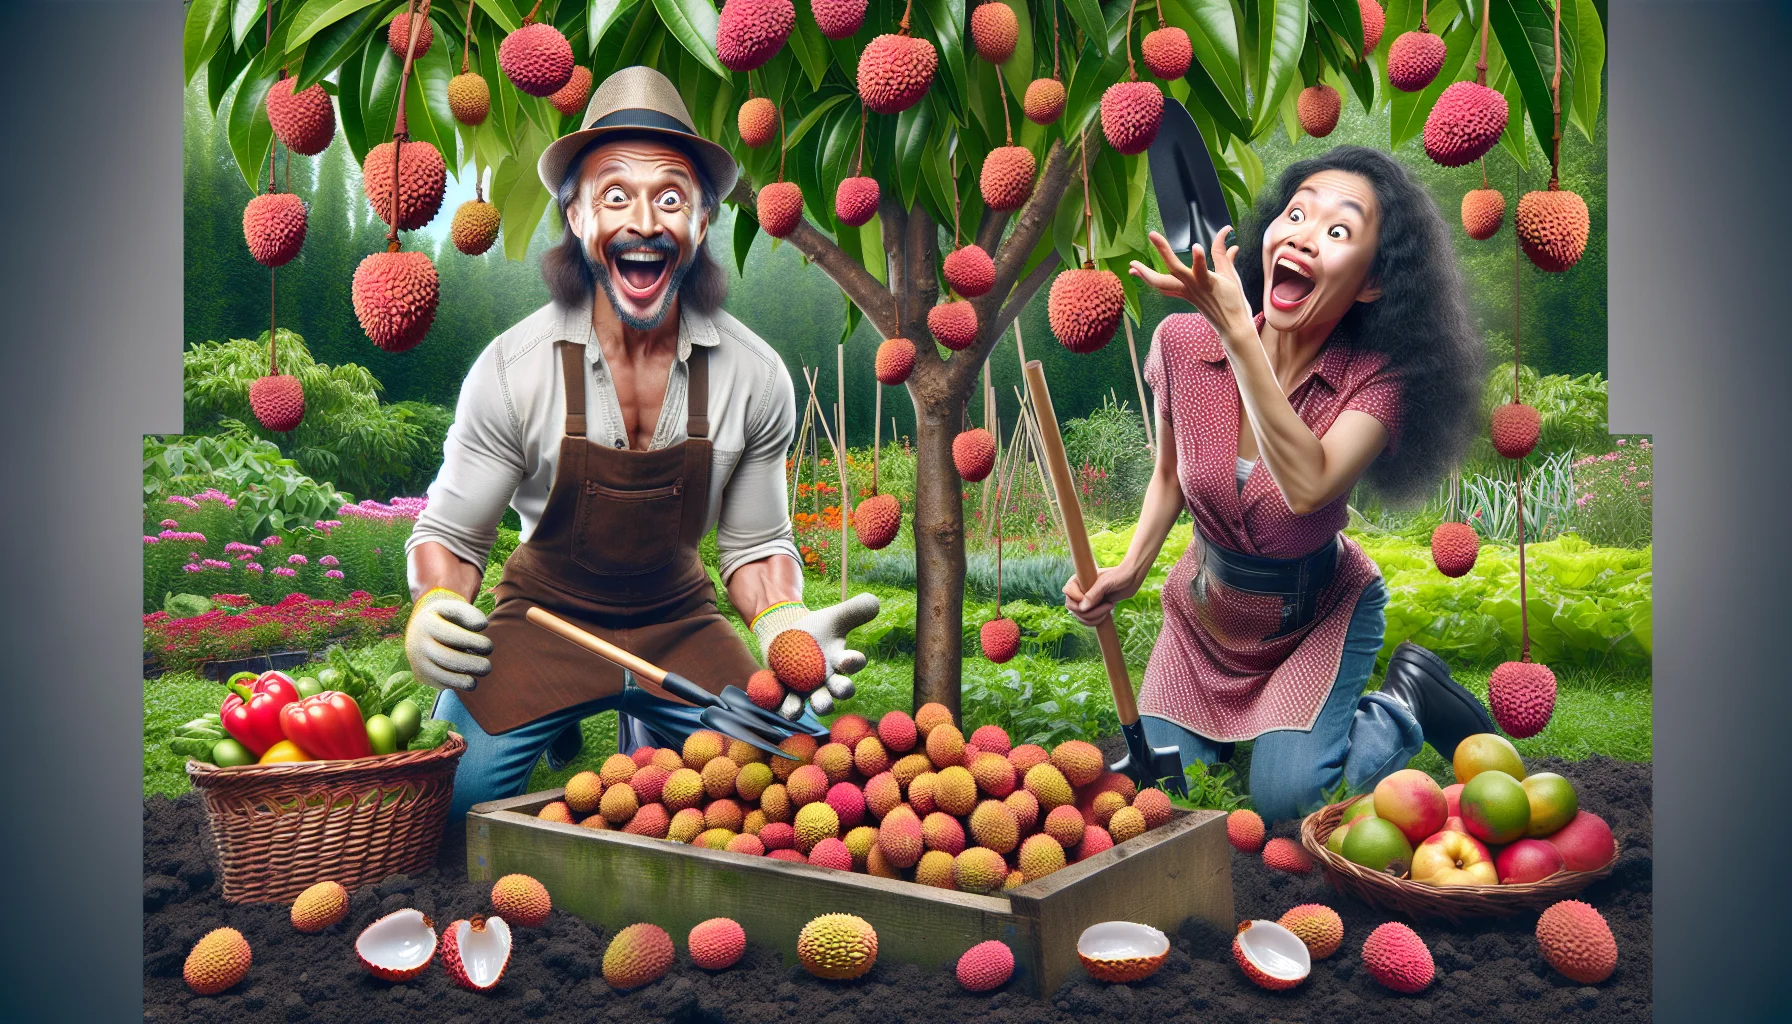 Create an imaginative, light-hearted scene that humorously embodies the flavor of lychee fruits. Picture a South Asian woman and a Hispanic man, both wearing their gardening attire and digging in a lush garden vibrant with different vegetables, fruits, and colorful flowers. They encounter a mature lychee tree bountiful with ripe fruits. Upon tasting a freshly plucked lychee, their facial expressions alter dramatically, mirroring the surprise of its sweet, tangy taste, and juicy nature. The man's hat flies off his head in surprise, while the woman joyously throws lychee fruits in the air.